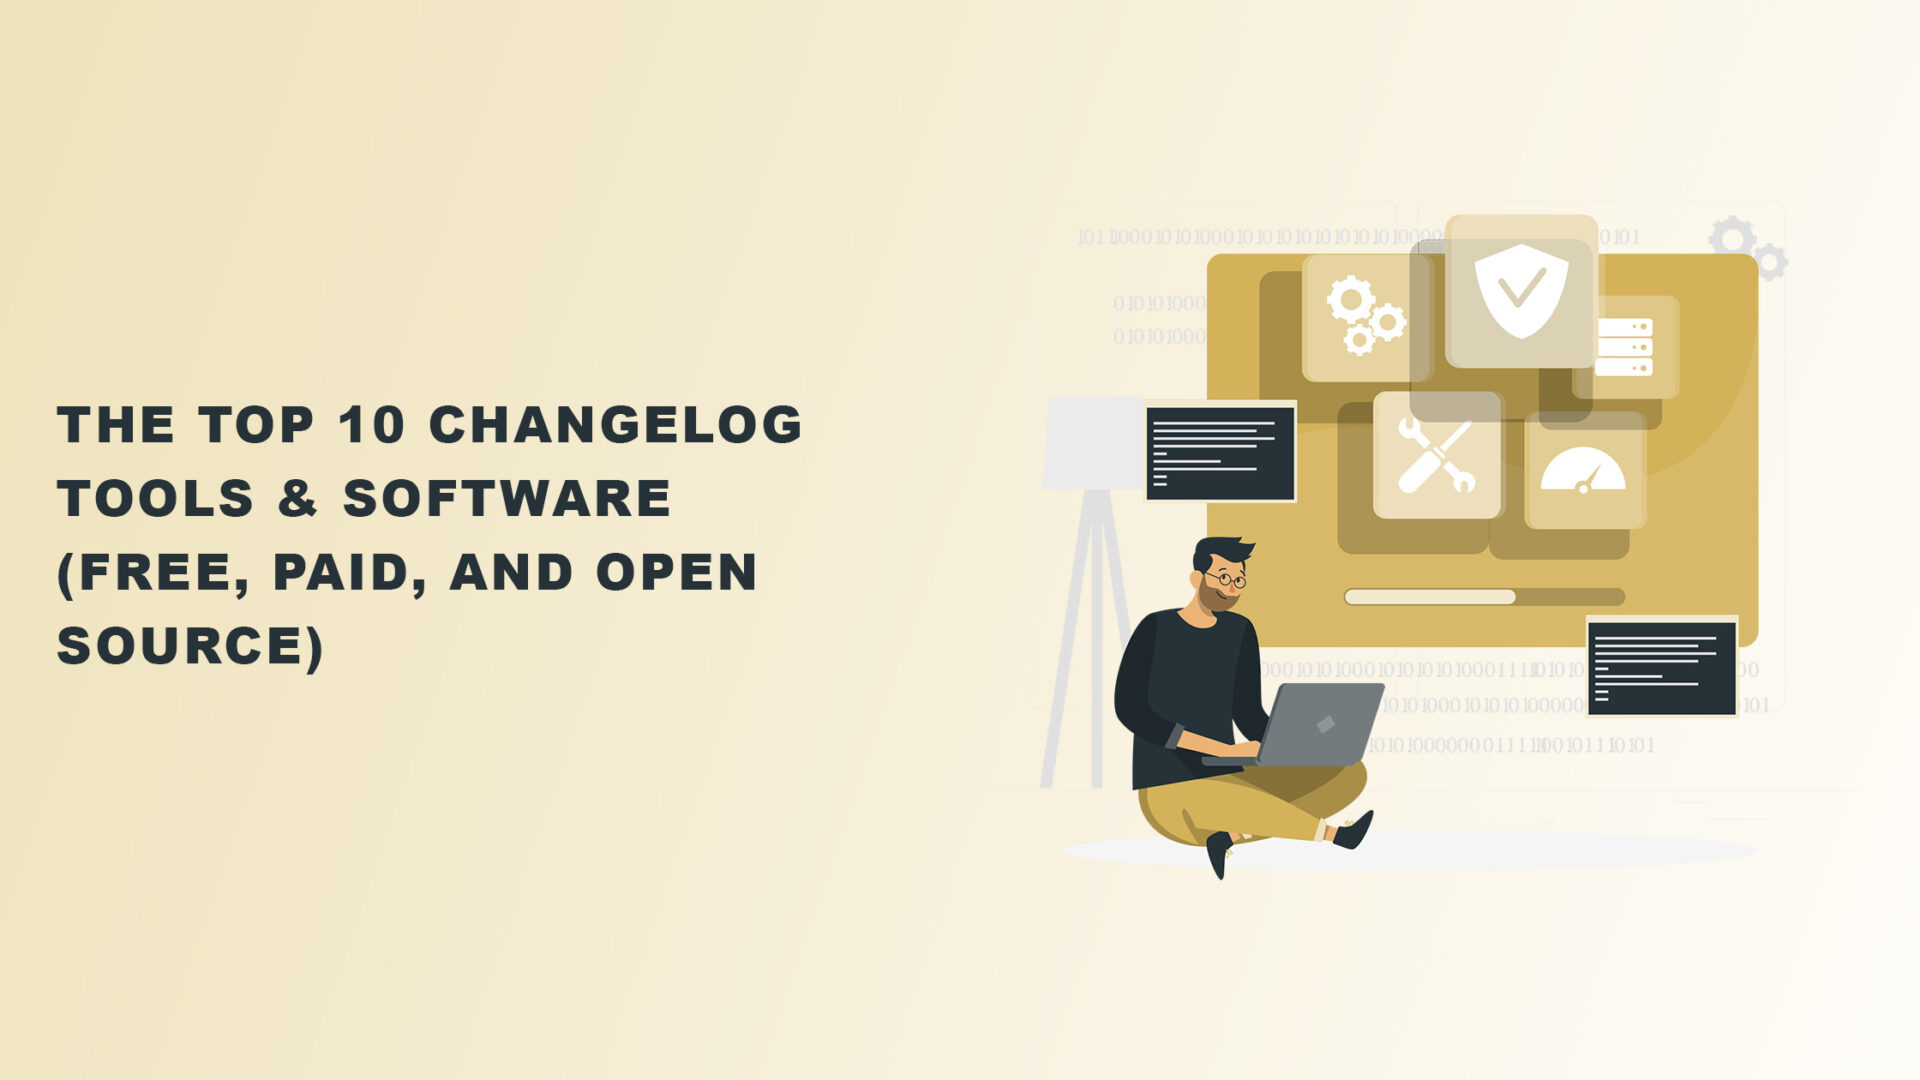 The top 10 changelog tools & software (Free, Paid, and Open Source)